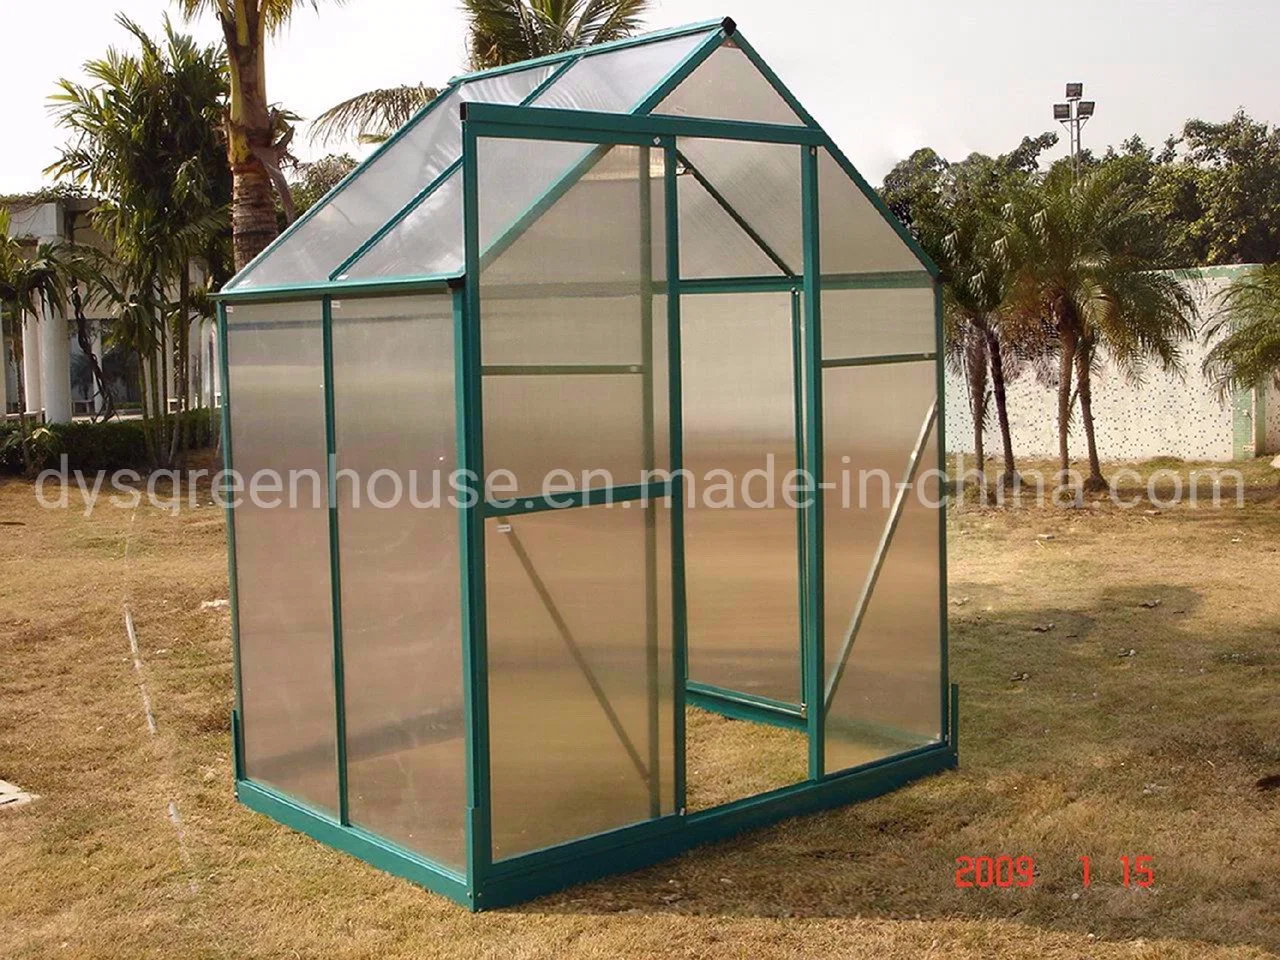 New Products Aluminium Frame Polycarbonate Grow Tent Greenhouse Rdga0604-4mm